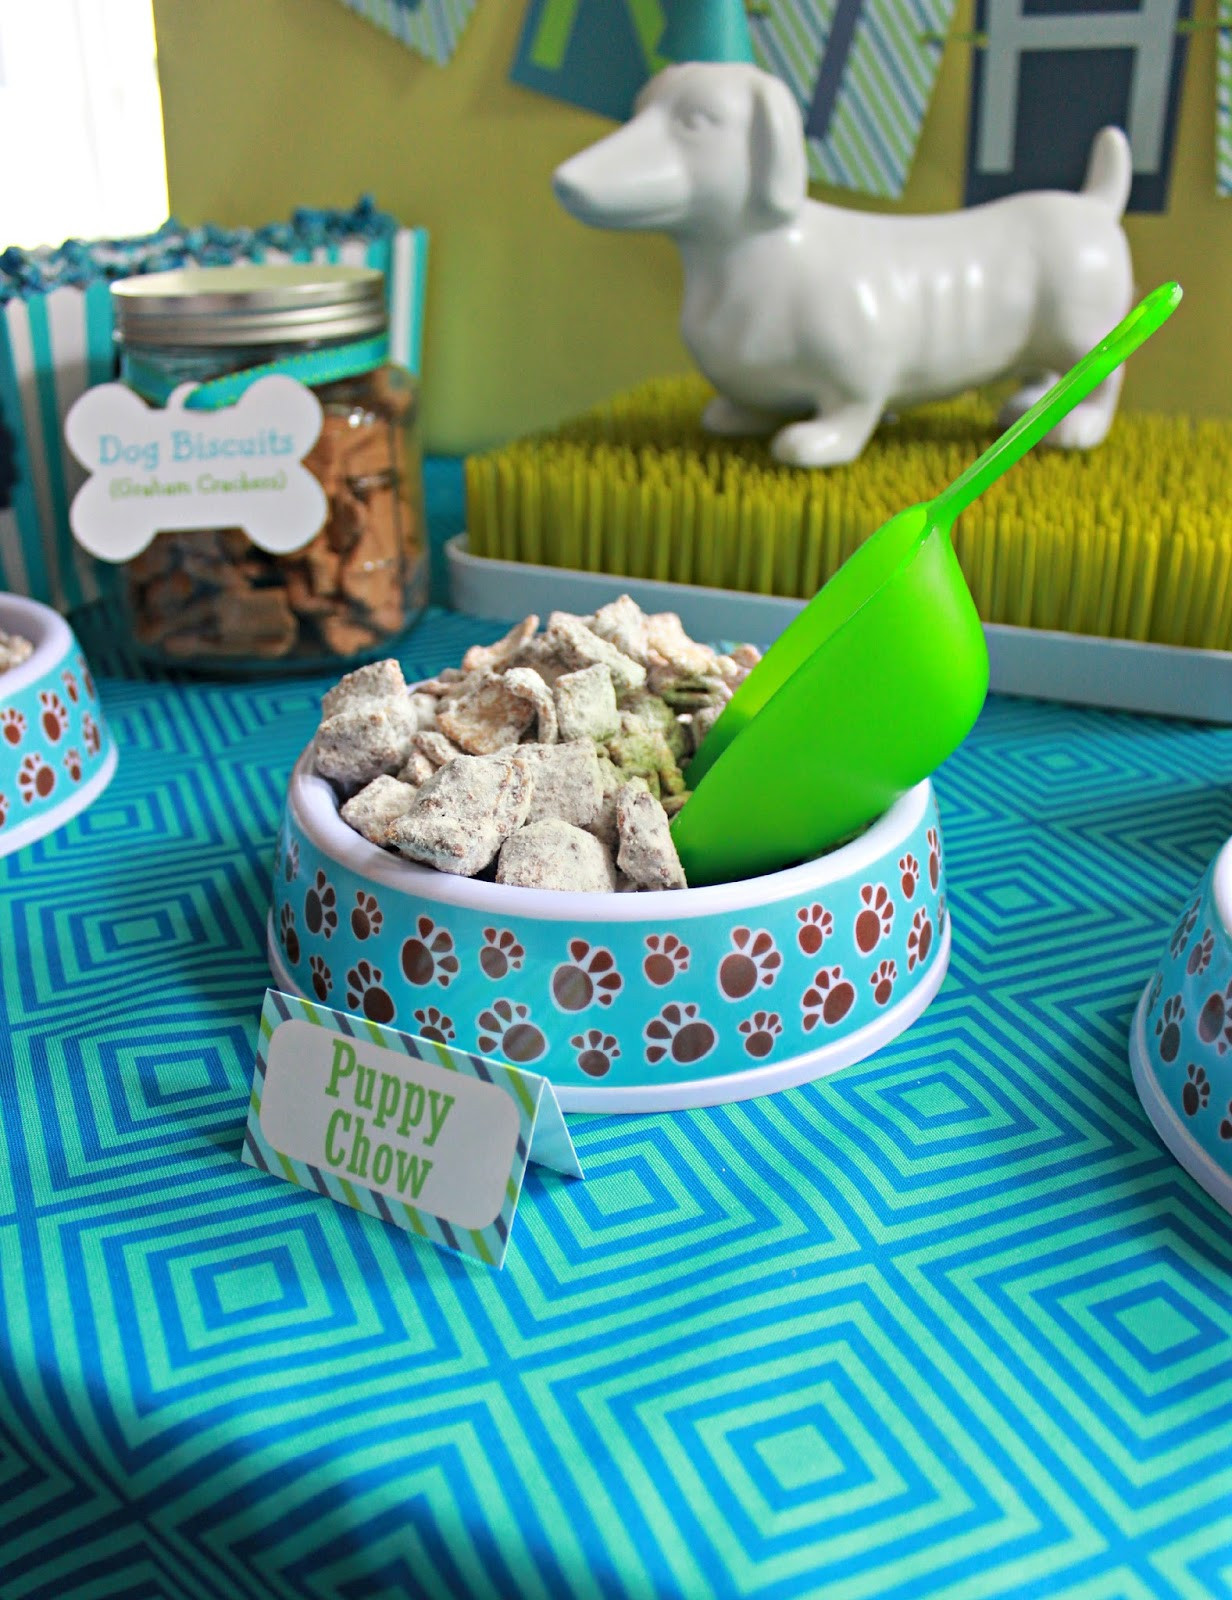 Dog Birthday Gift Ideas
 It s a Pawty Puppy Party First Birthday Part 1